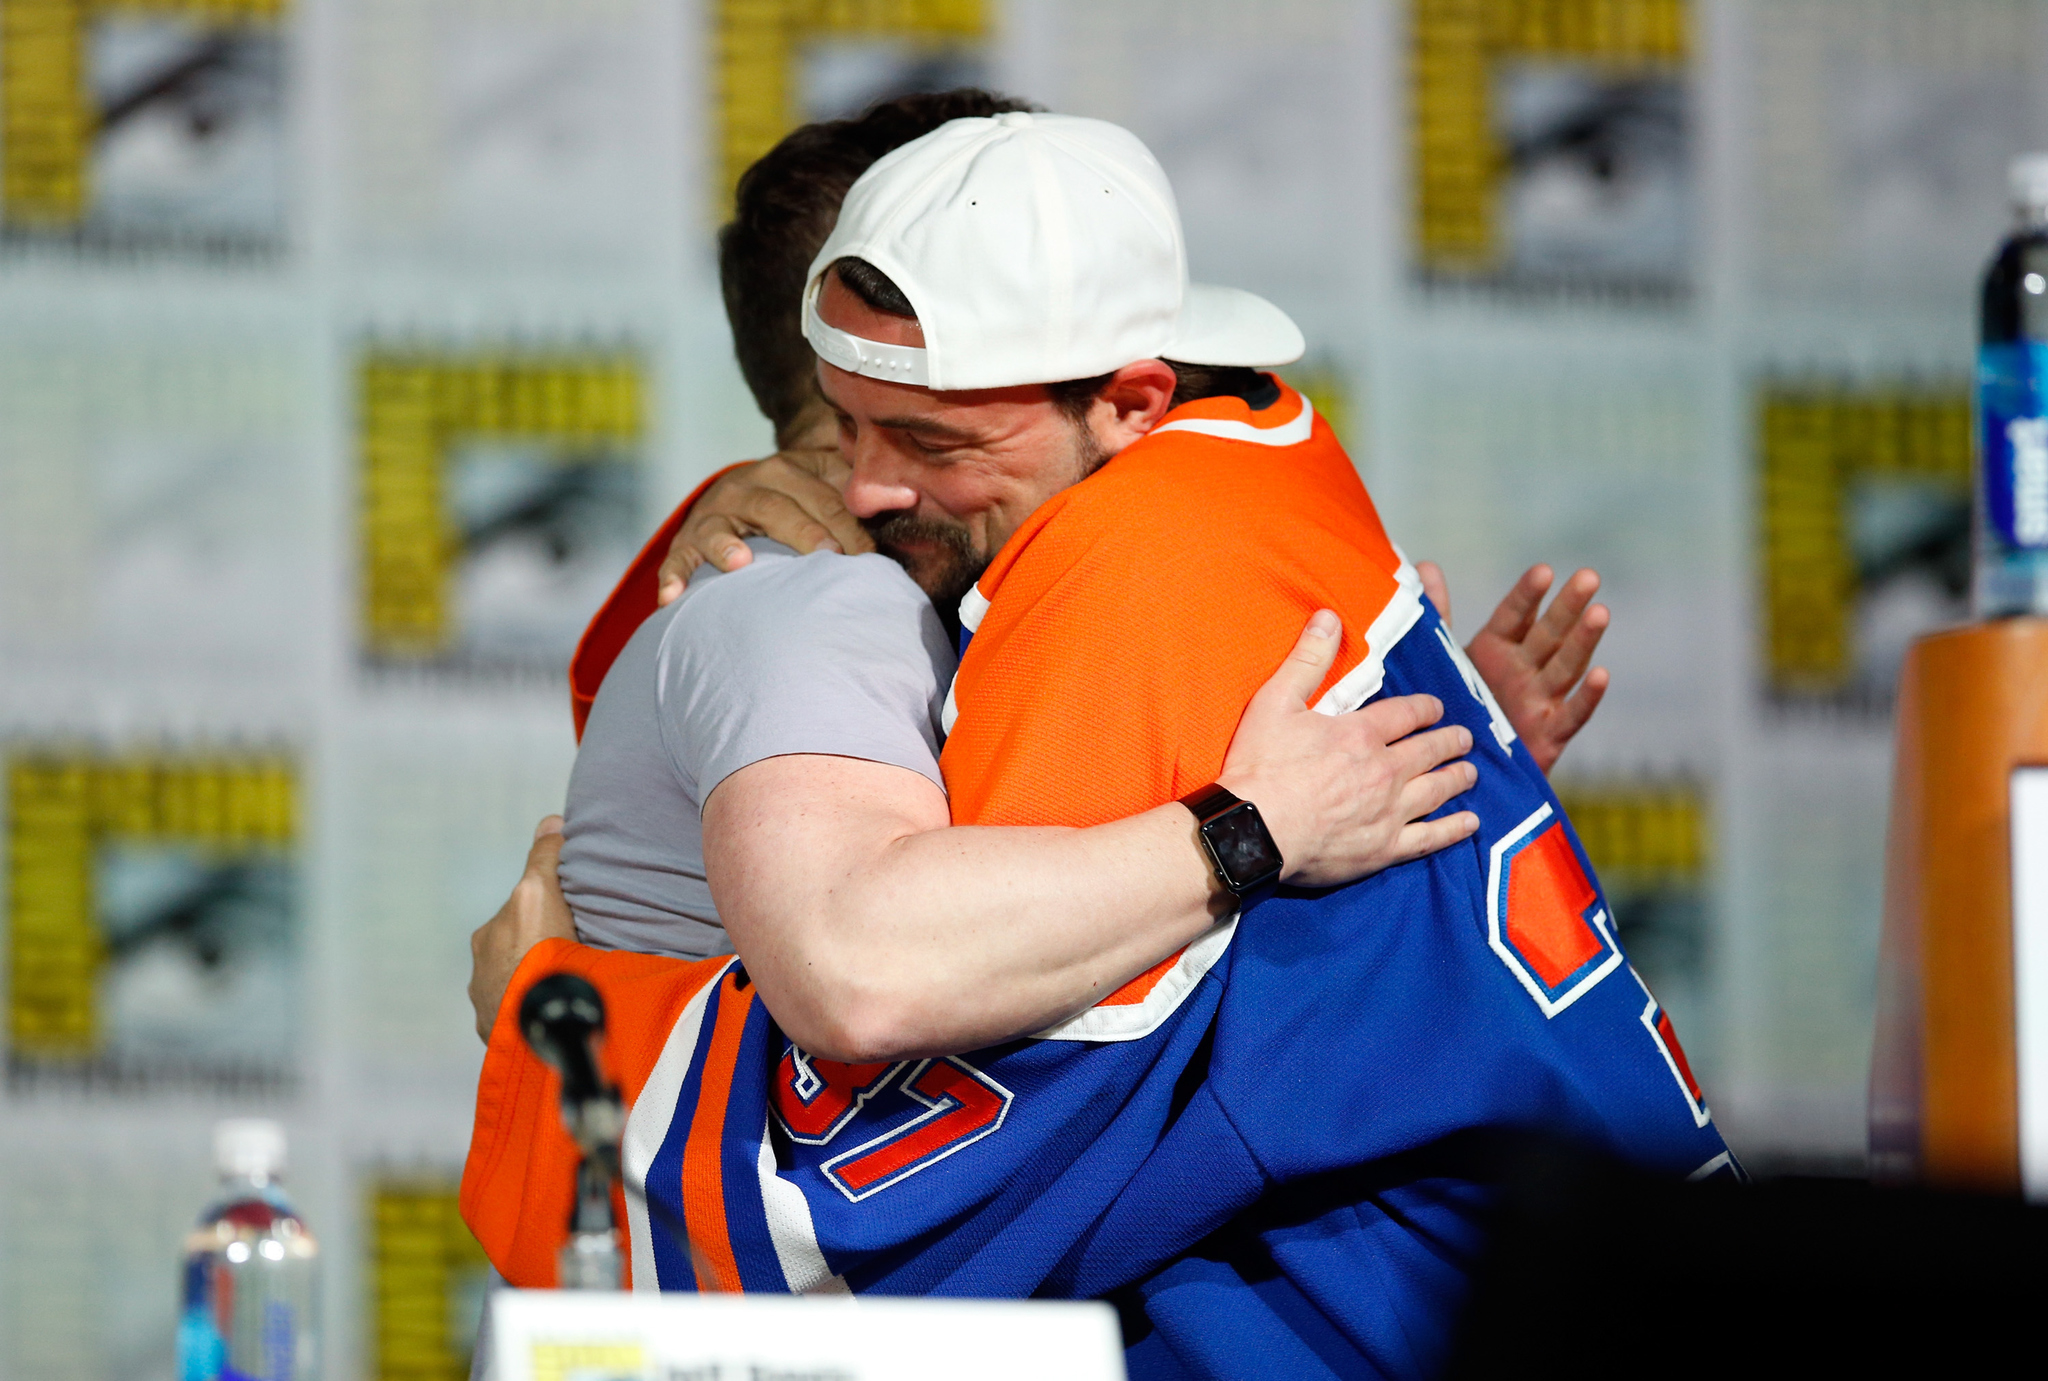 Kevin Smith and Jeff Davis at event of Teen Wolf (2011)